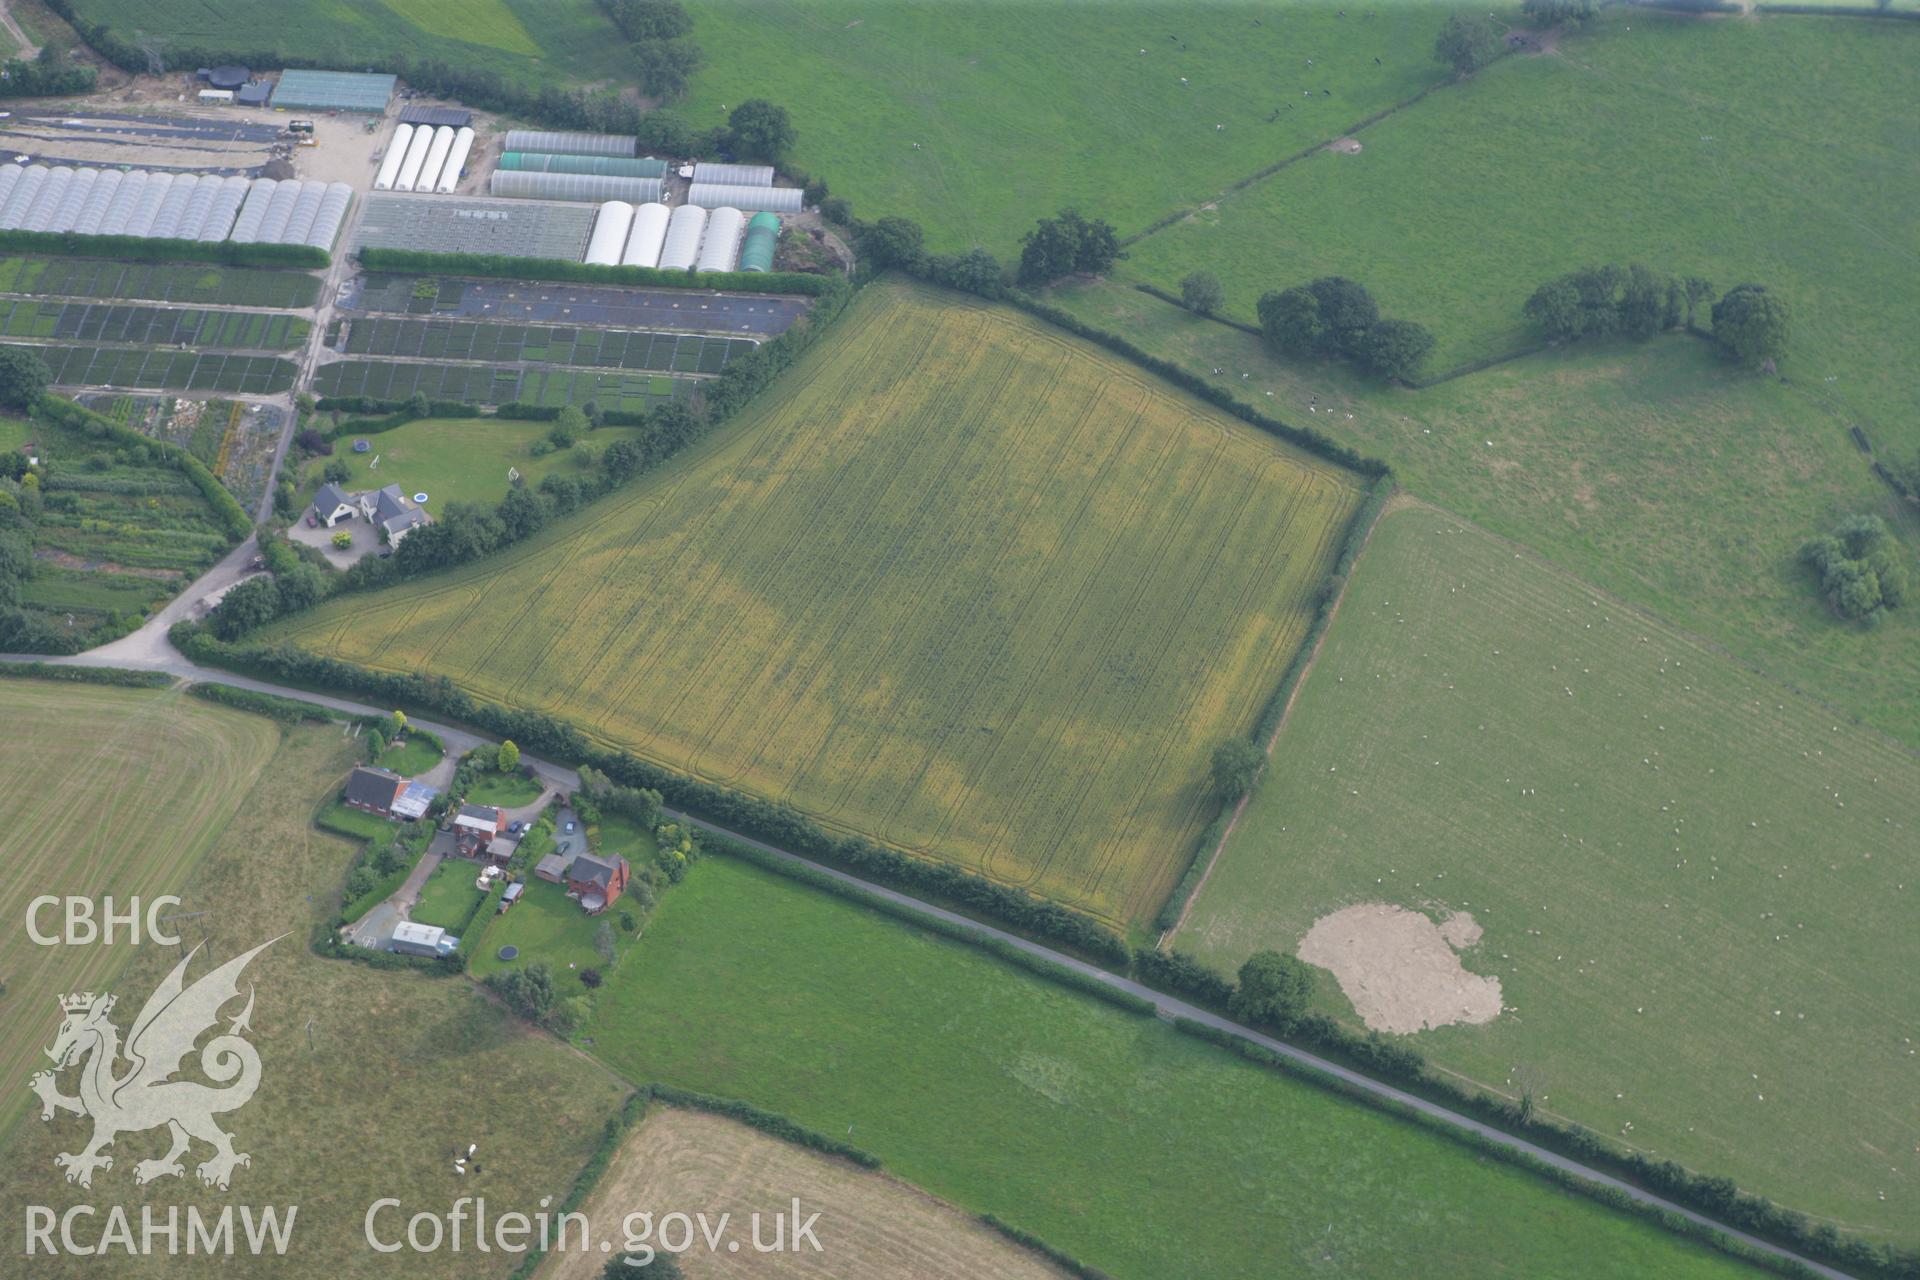 RCAHMW colour oblique photograph of Domgay Lane Linear Cropmarks and Field System. Taken by Toby Driver on 24/07/2008.